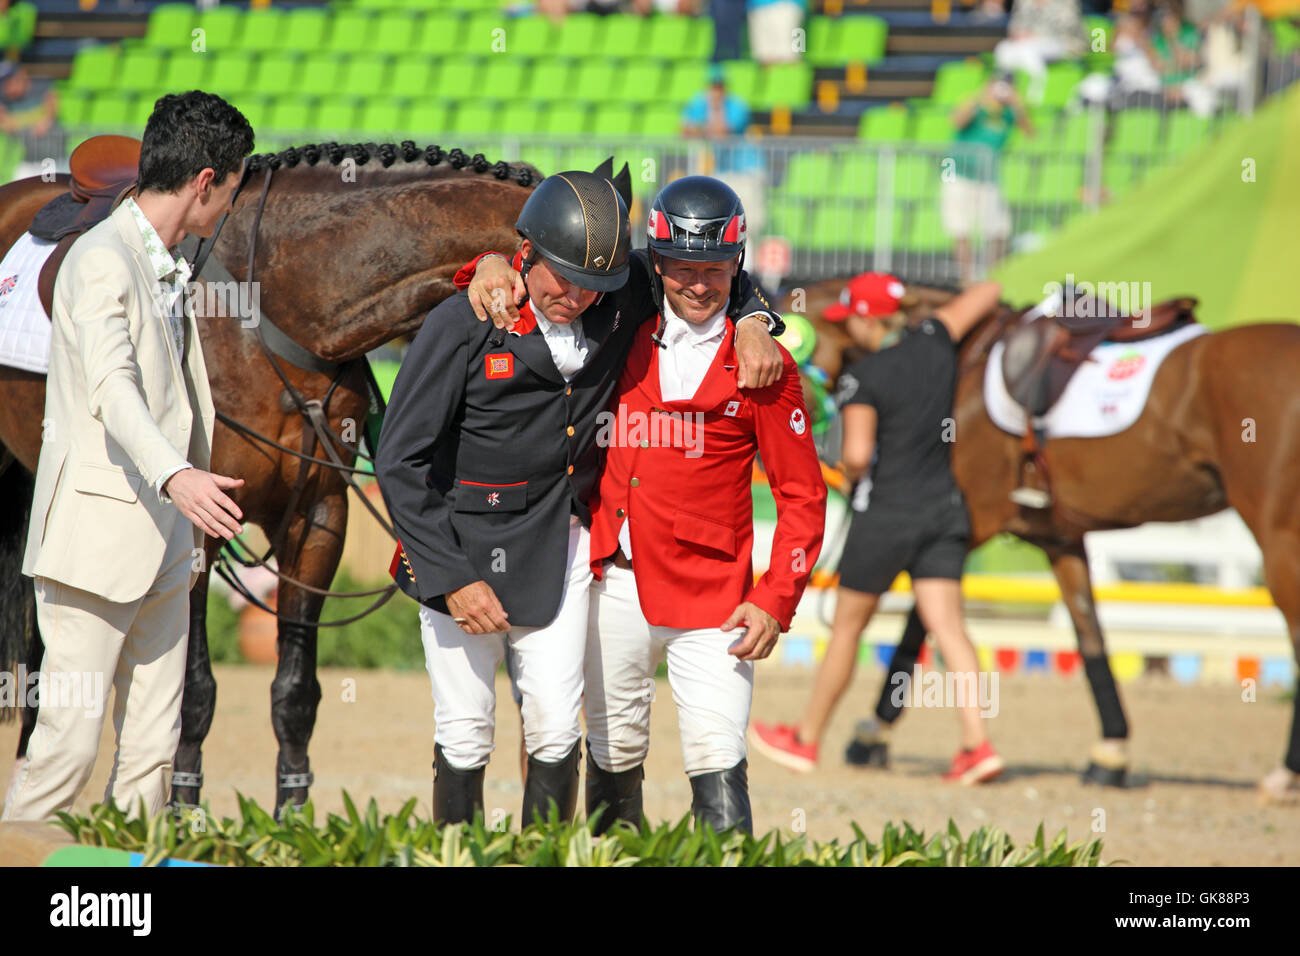 Rio de Janeiro, Brazil. 19th August, 2016. Nick Skelton GBR, Gold Medal Winner in the Olympic Equestrian Show Jumping event hugs Eric Lamaze of Canada, the Bronze Medal Winner in Rio de Janeiro, Brazil. Stock Photo